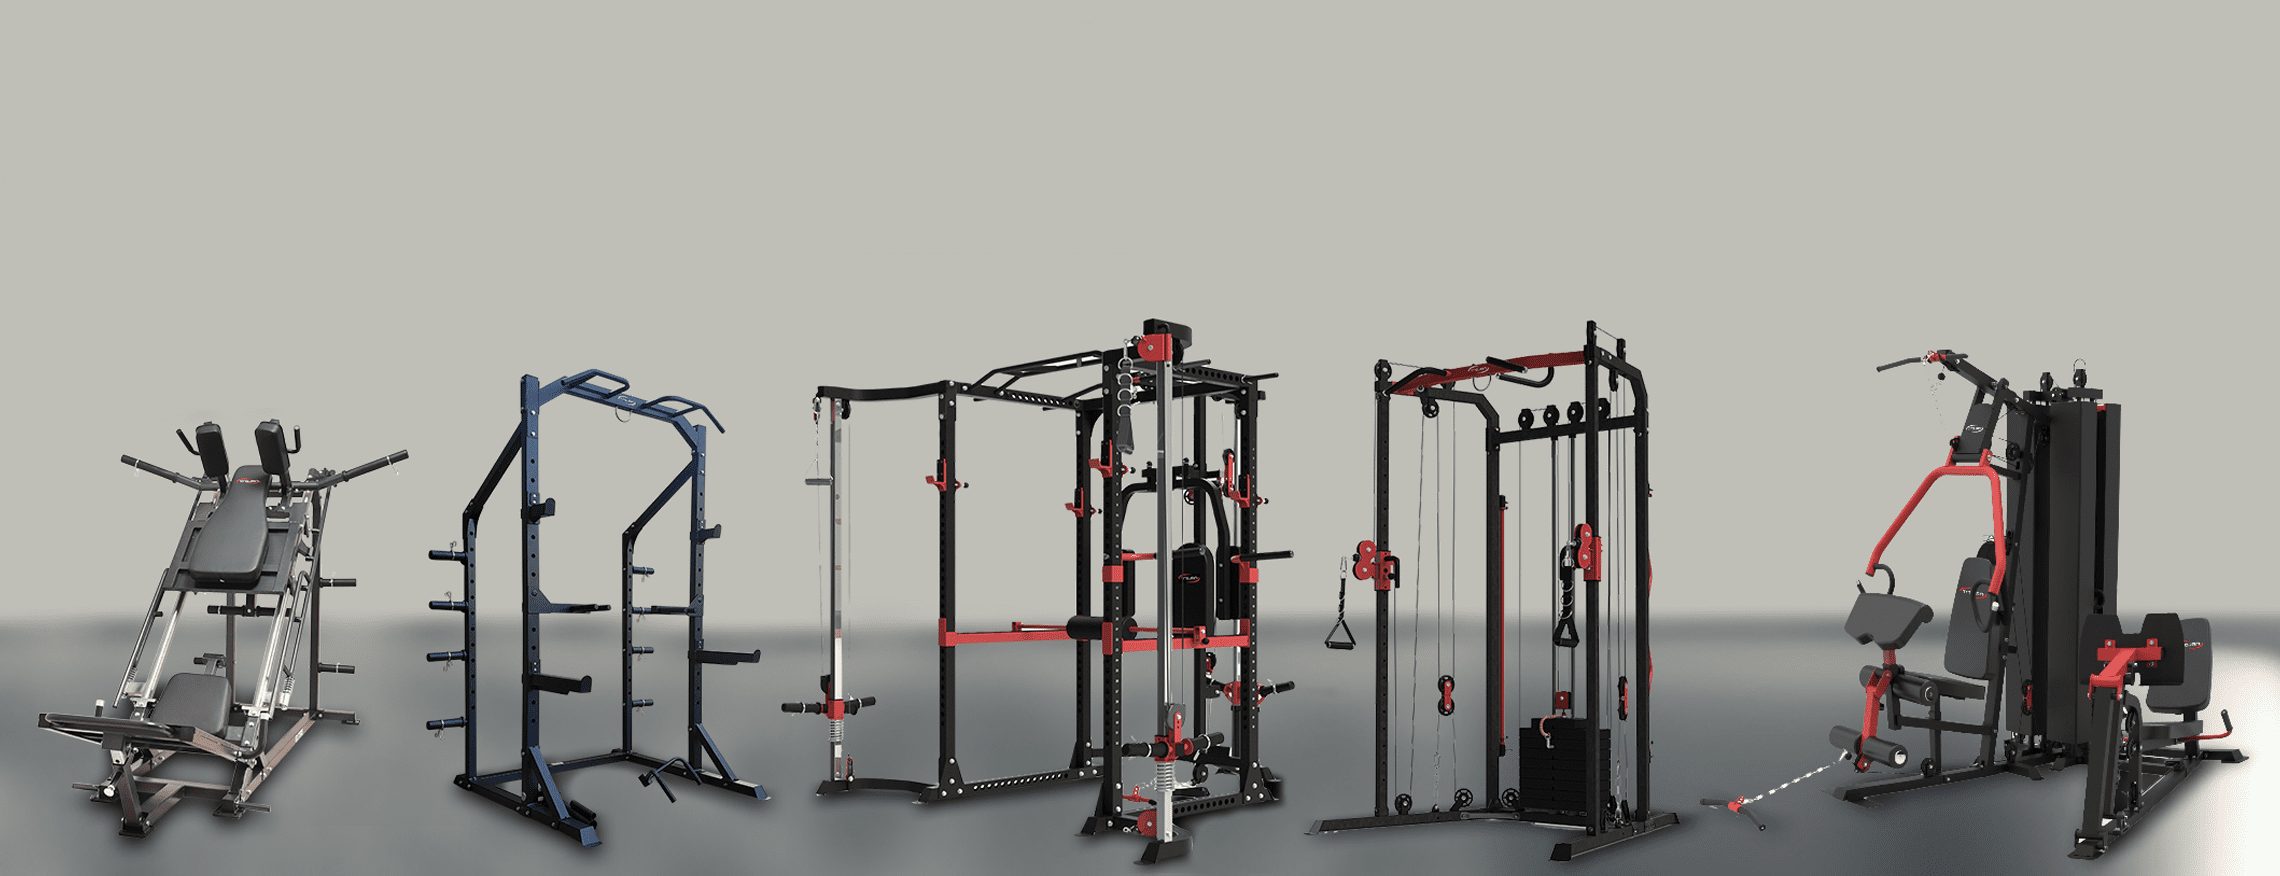 Doing Exercise Here Are The Best Must Have Exercise Training Equipment You Need copy